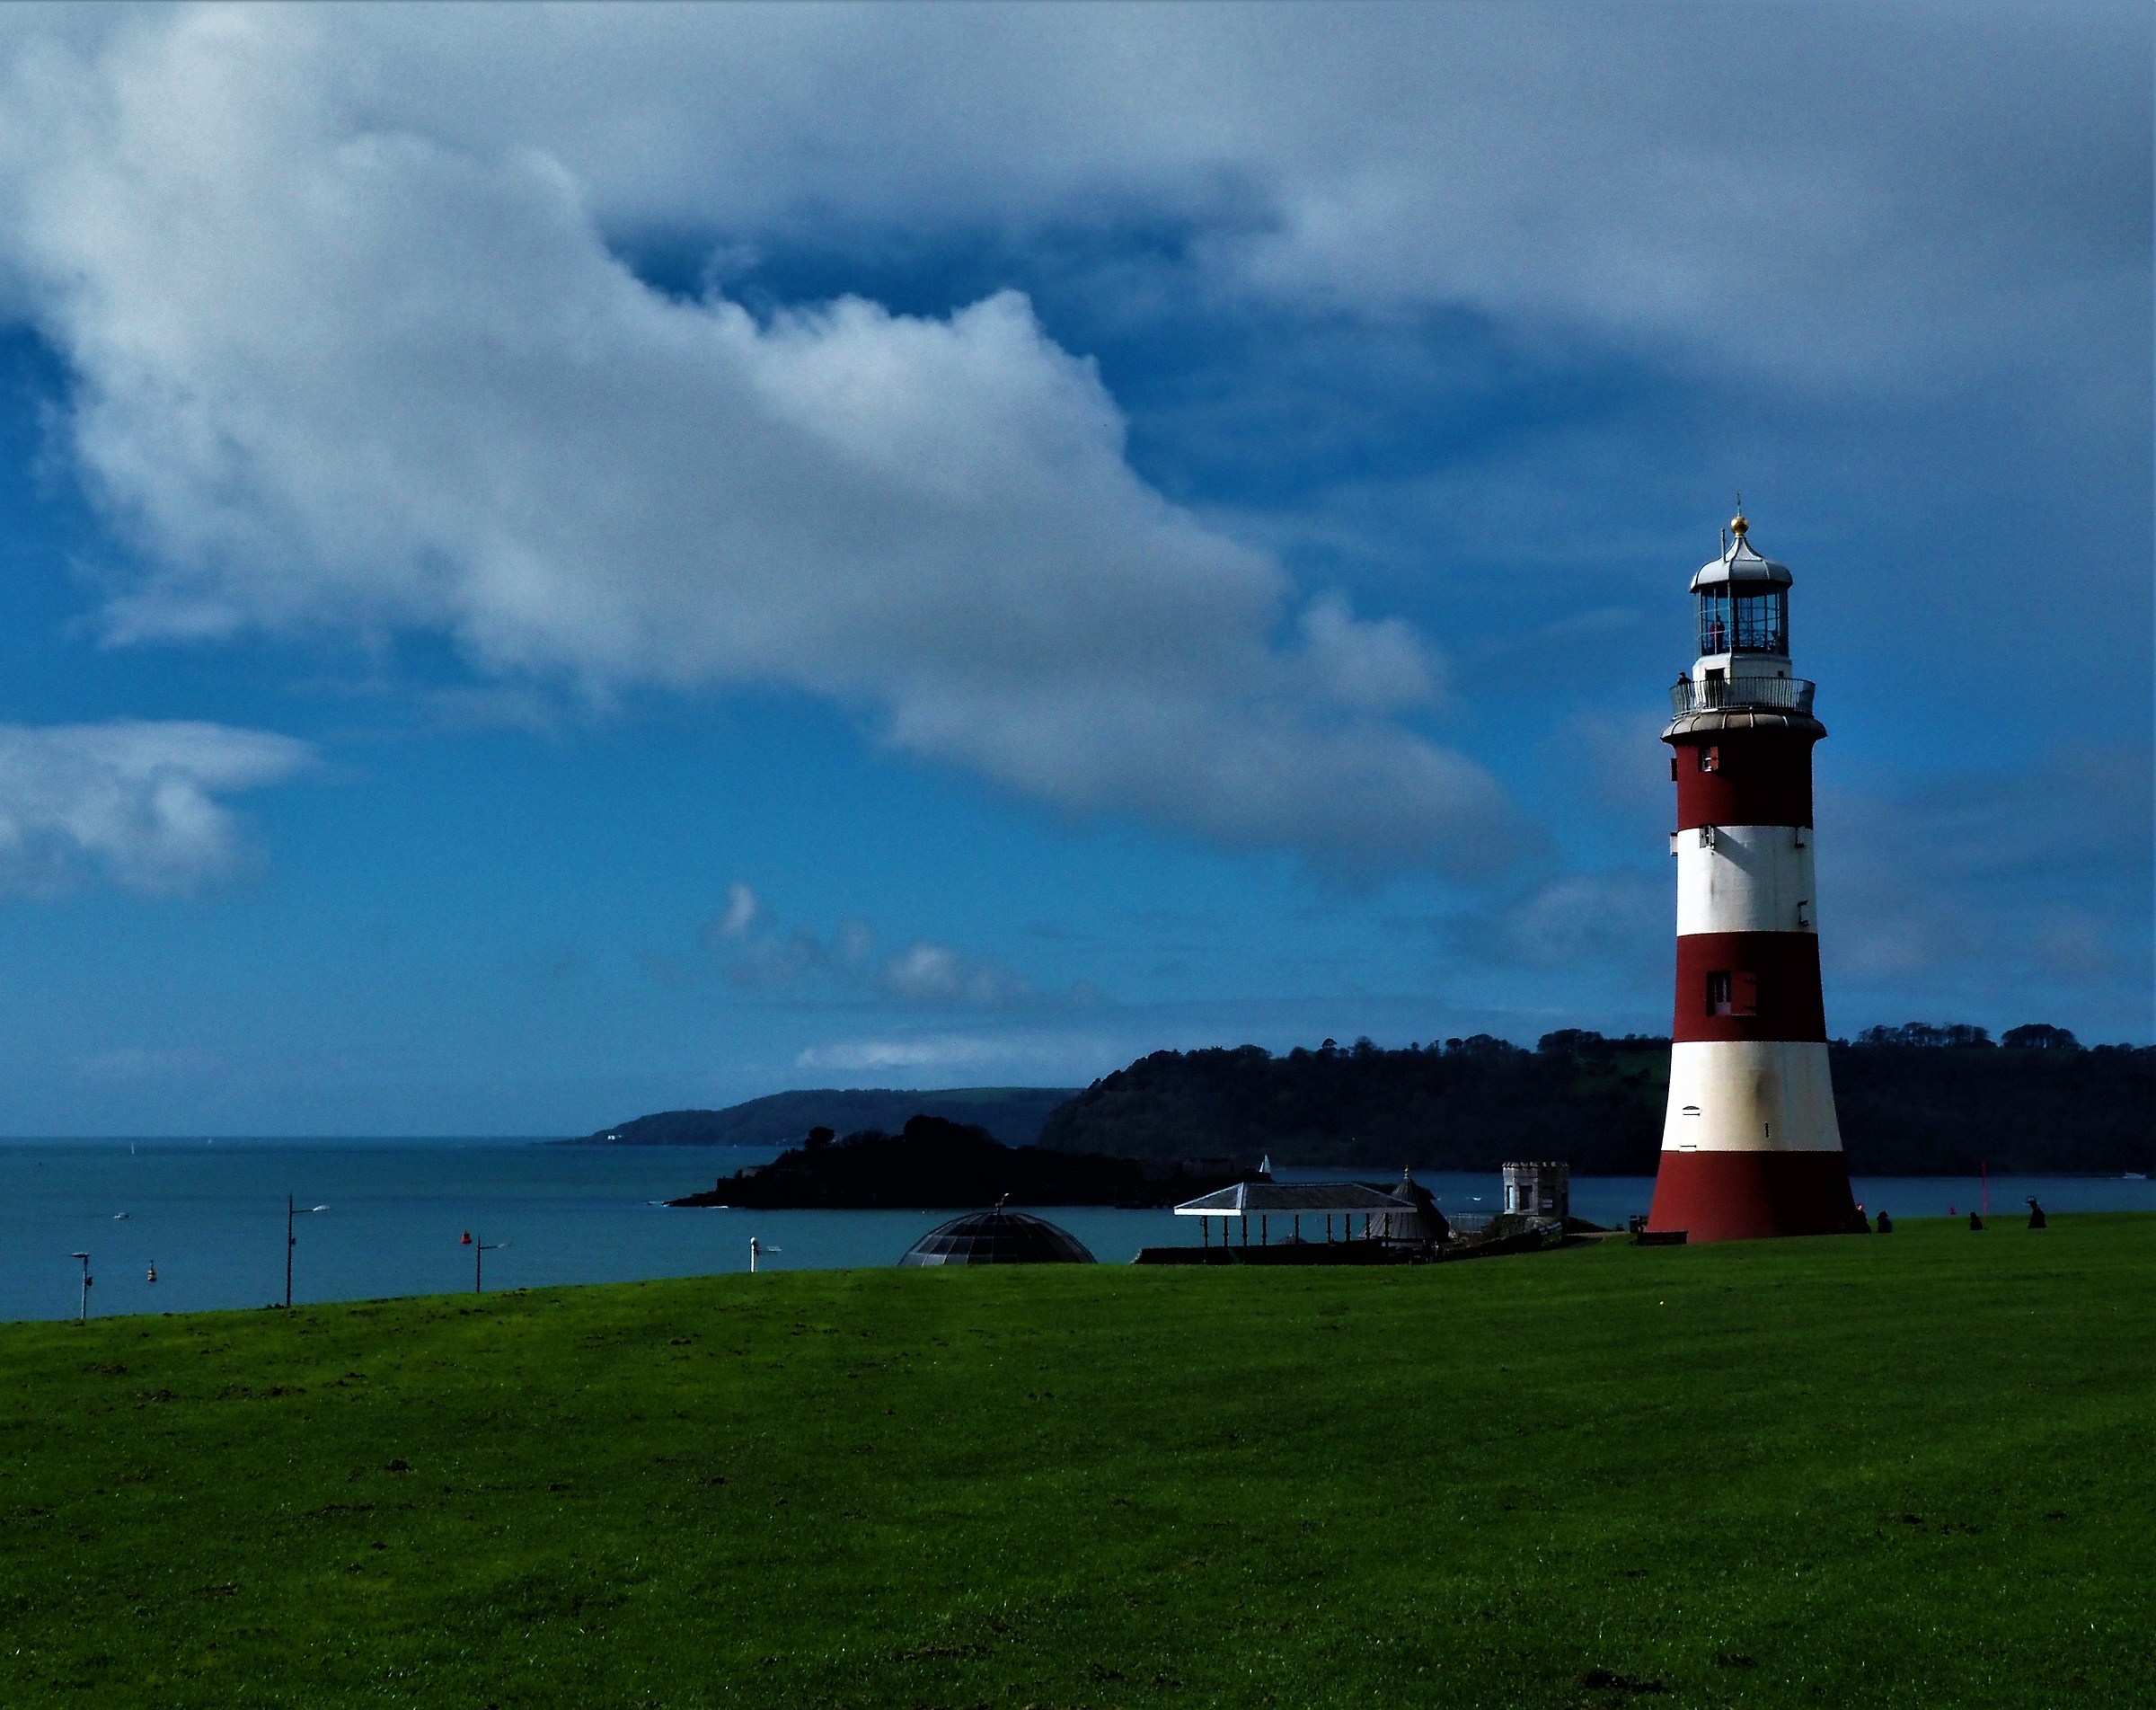 Plymouth with 14-42mm f3.5-56 EZ, F22 1/640 Sec at 22mm...